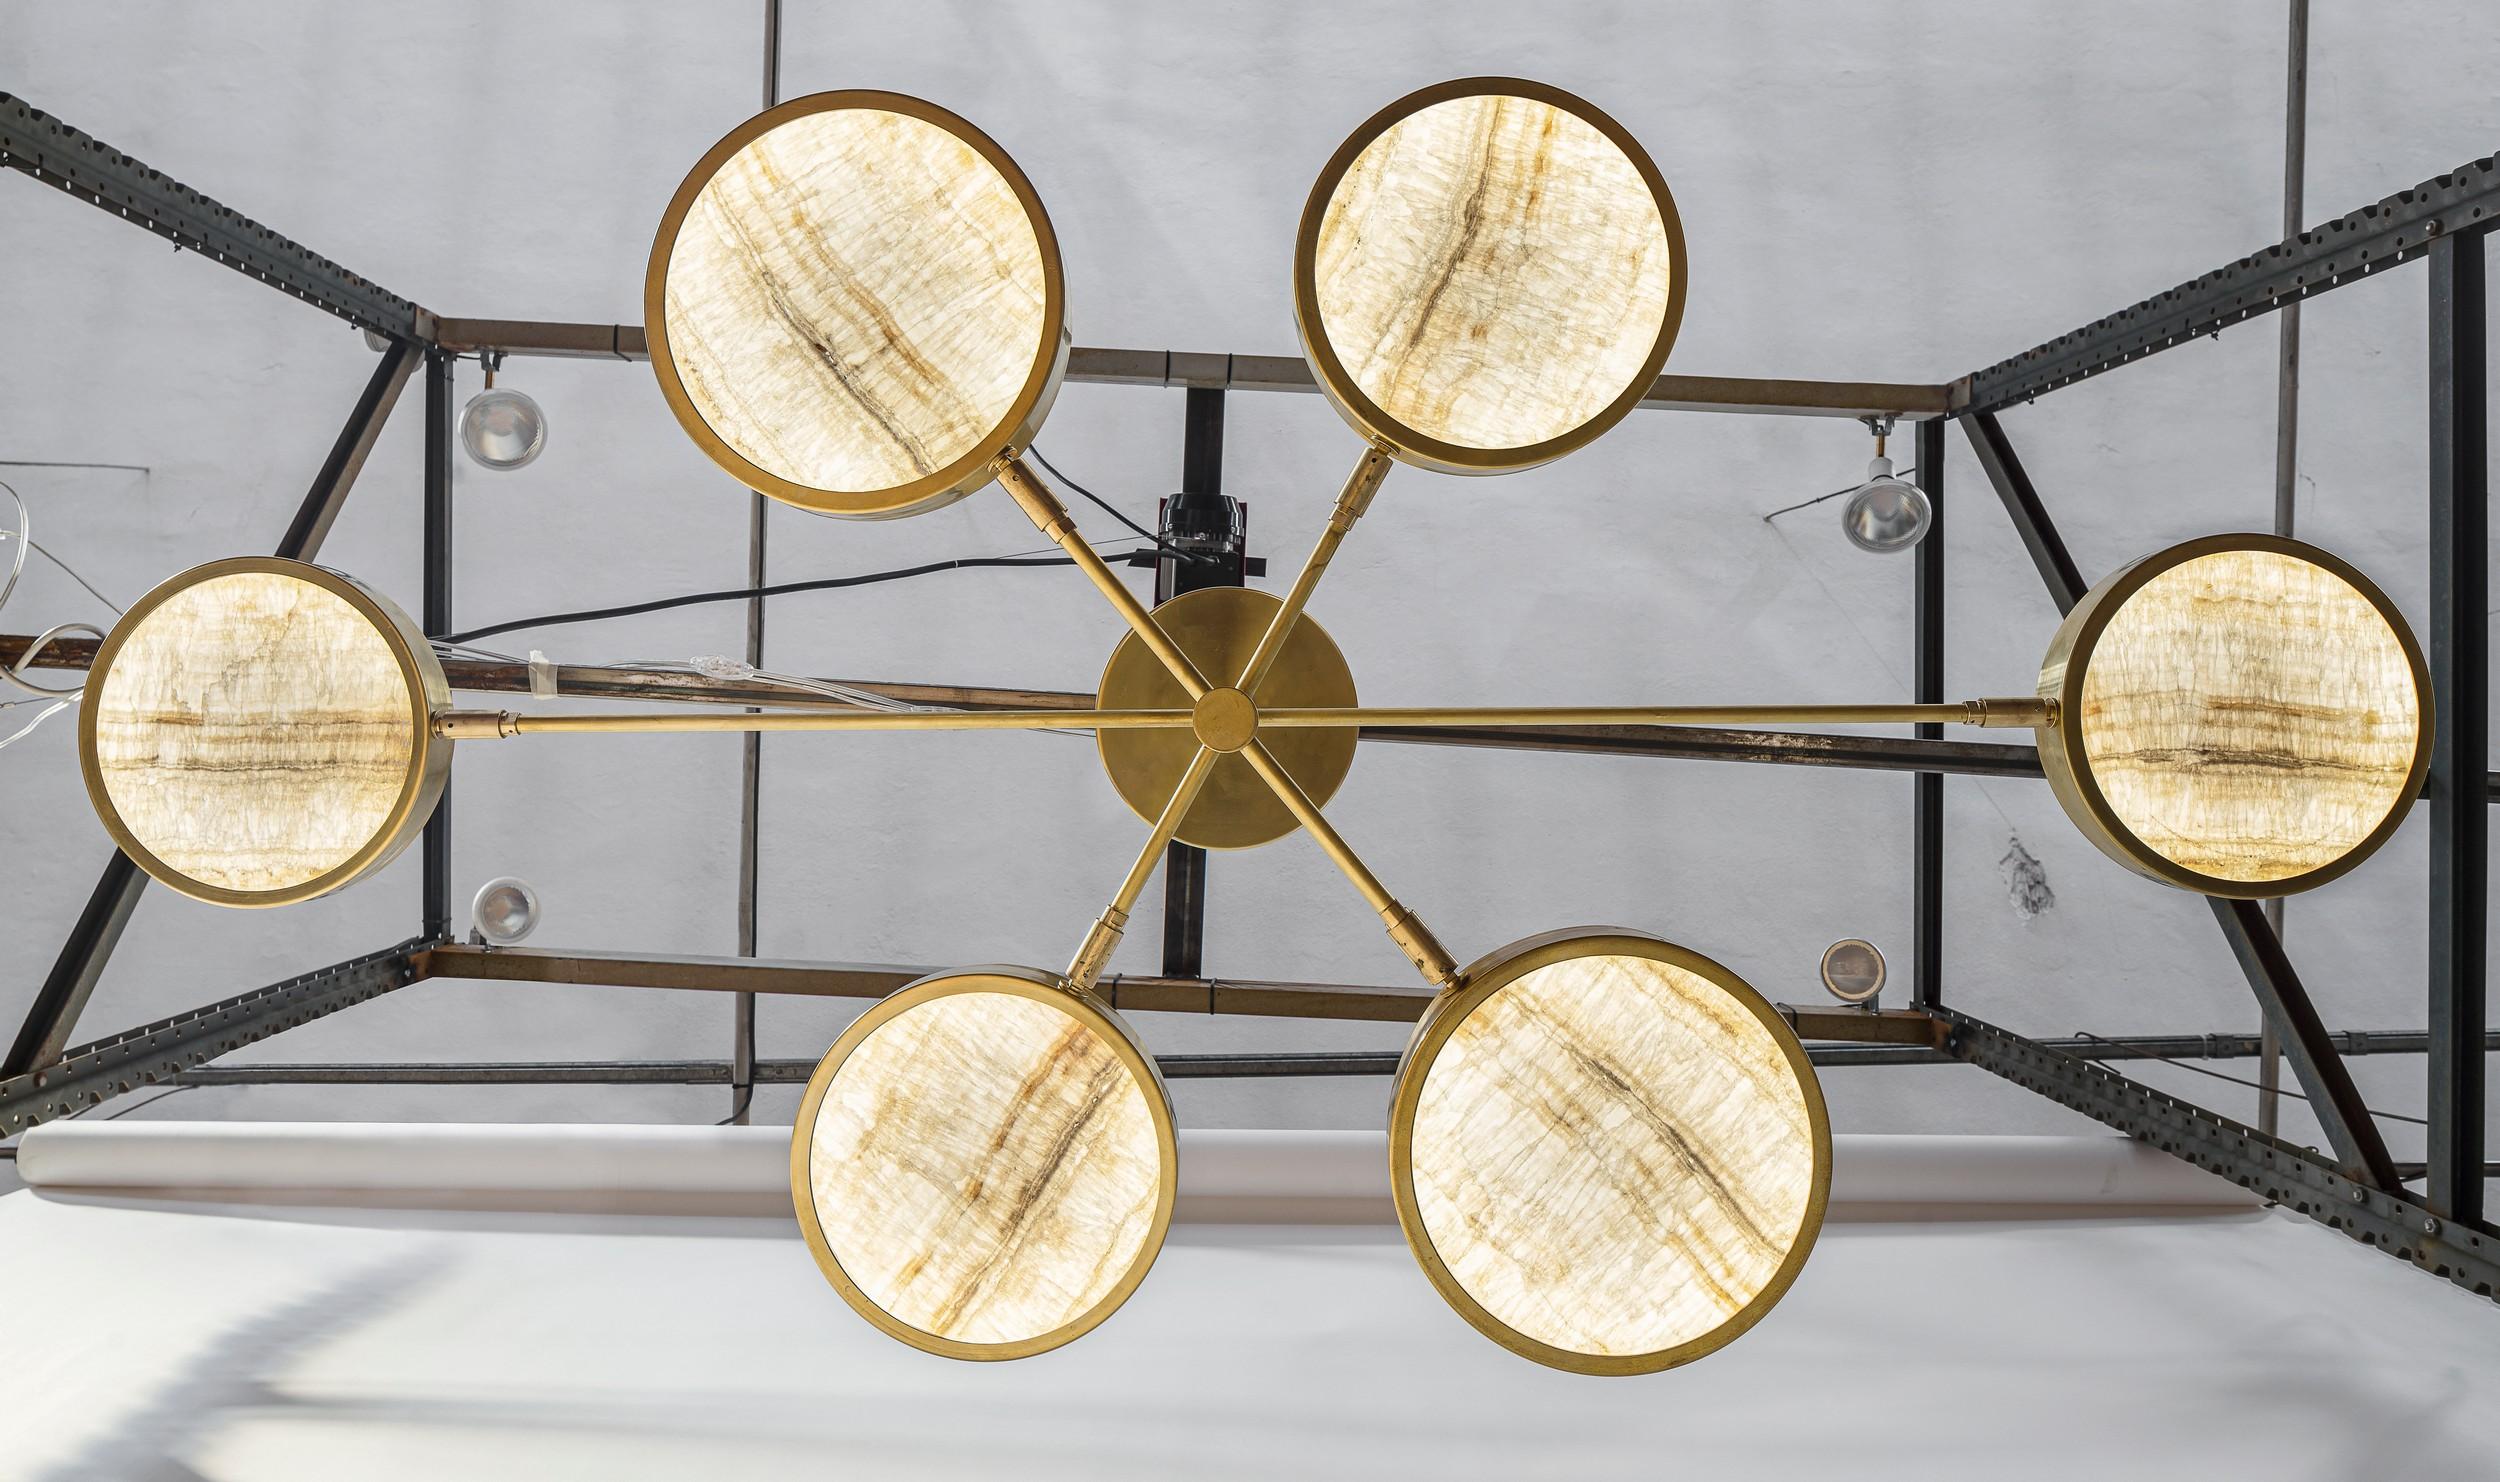 Italian Sistema Solare Chandelier, Piattelli Design, Ivory-toned Onyx and Brass, 6-shade For Sale